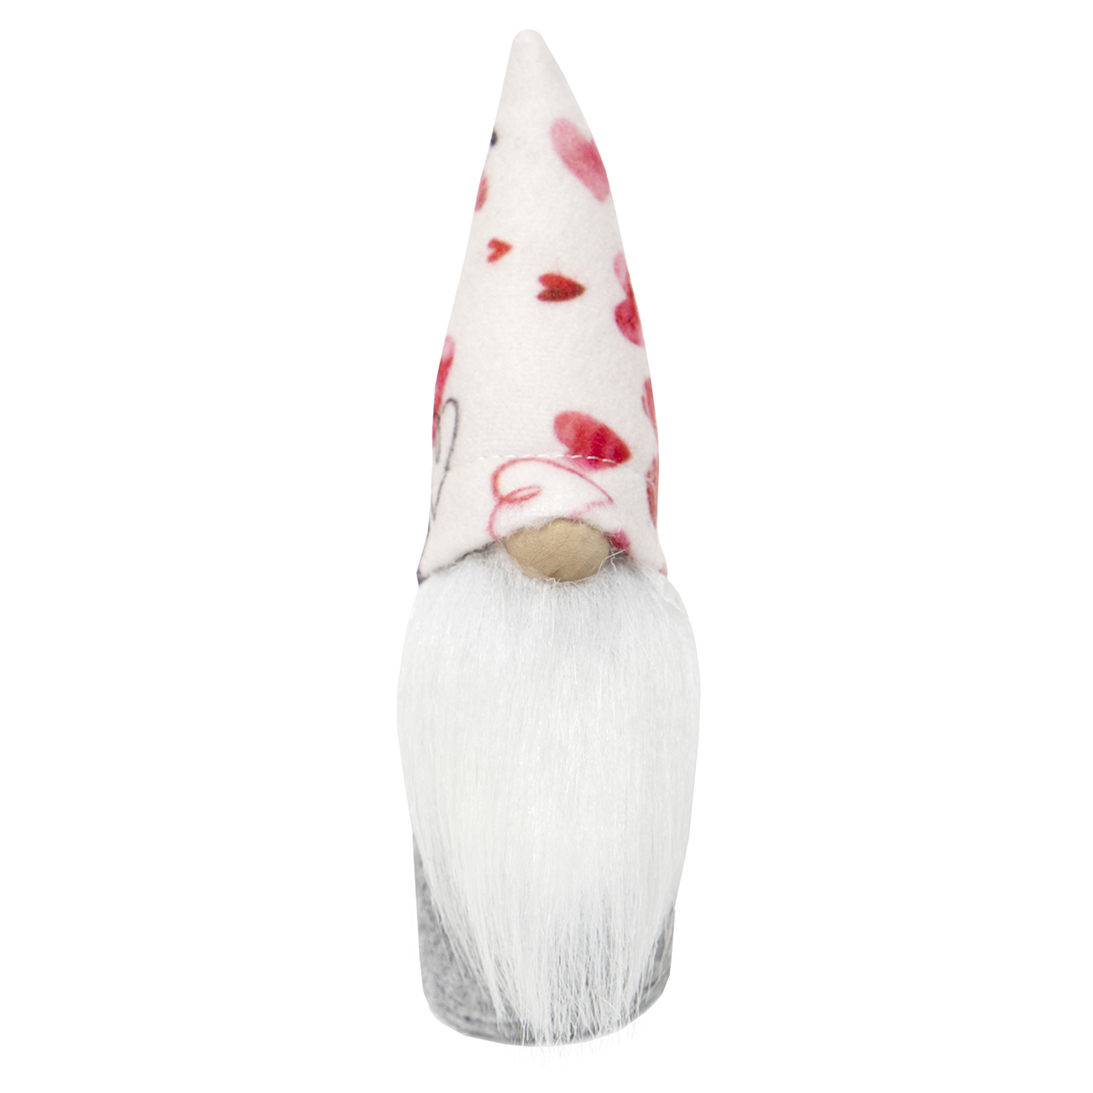 !Sir Heartsalot Gnome with Wood Nose 6.5" Small